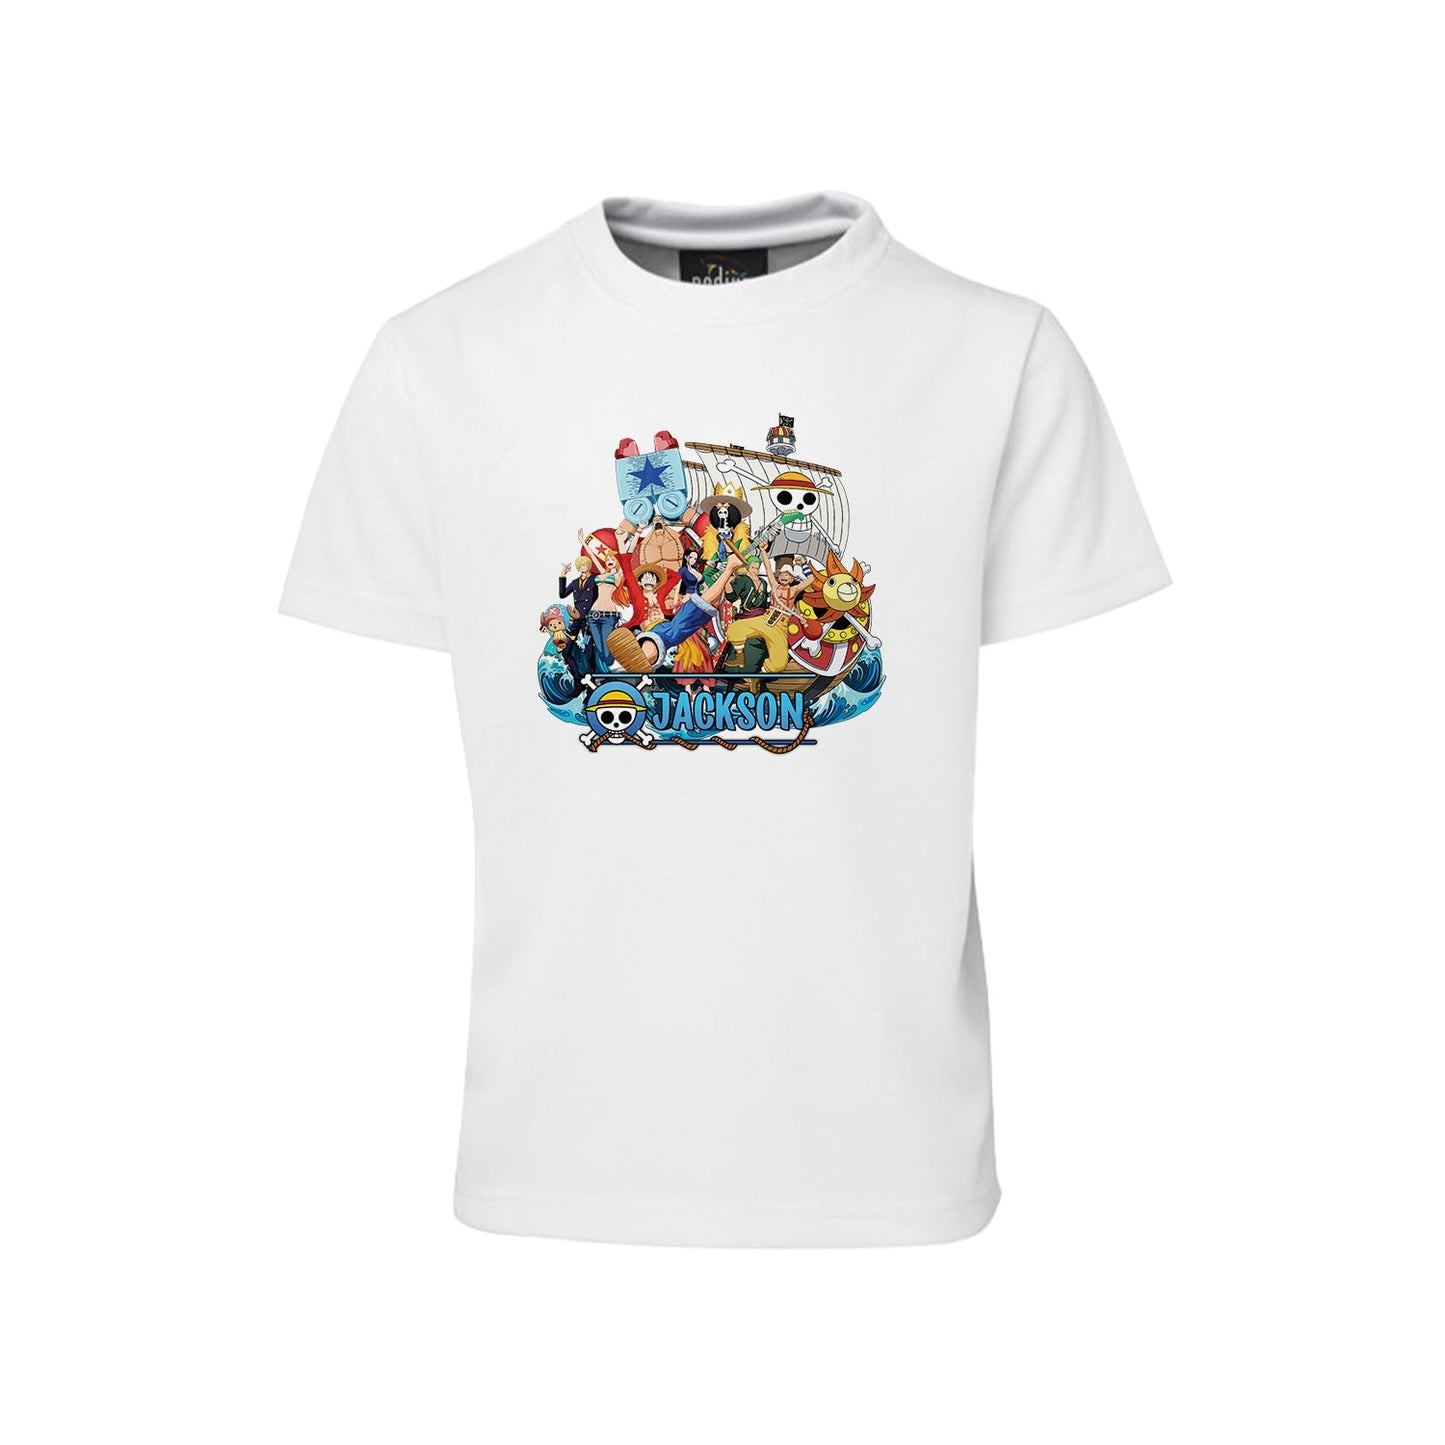 Sublimation T-Shirt with One Piece Manga Series Design